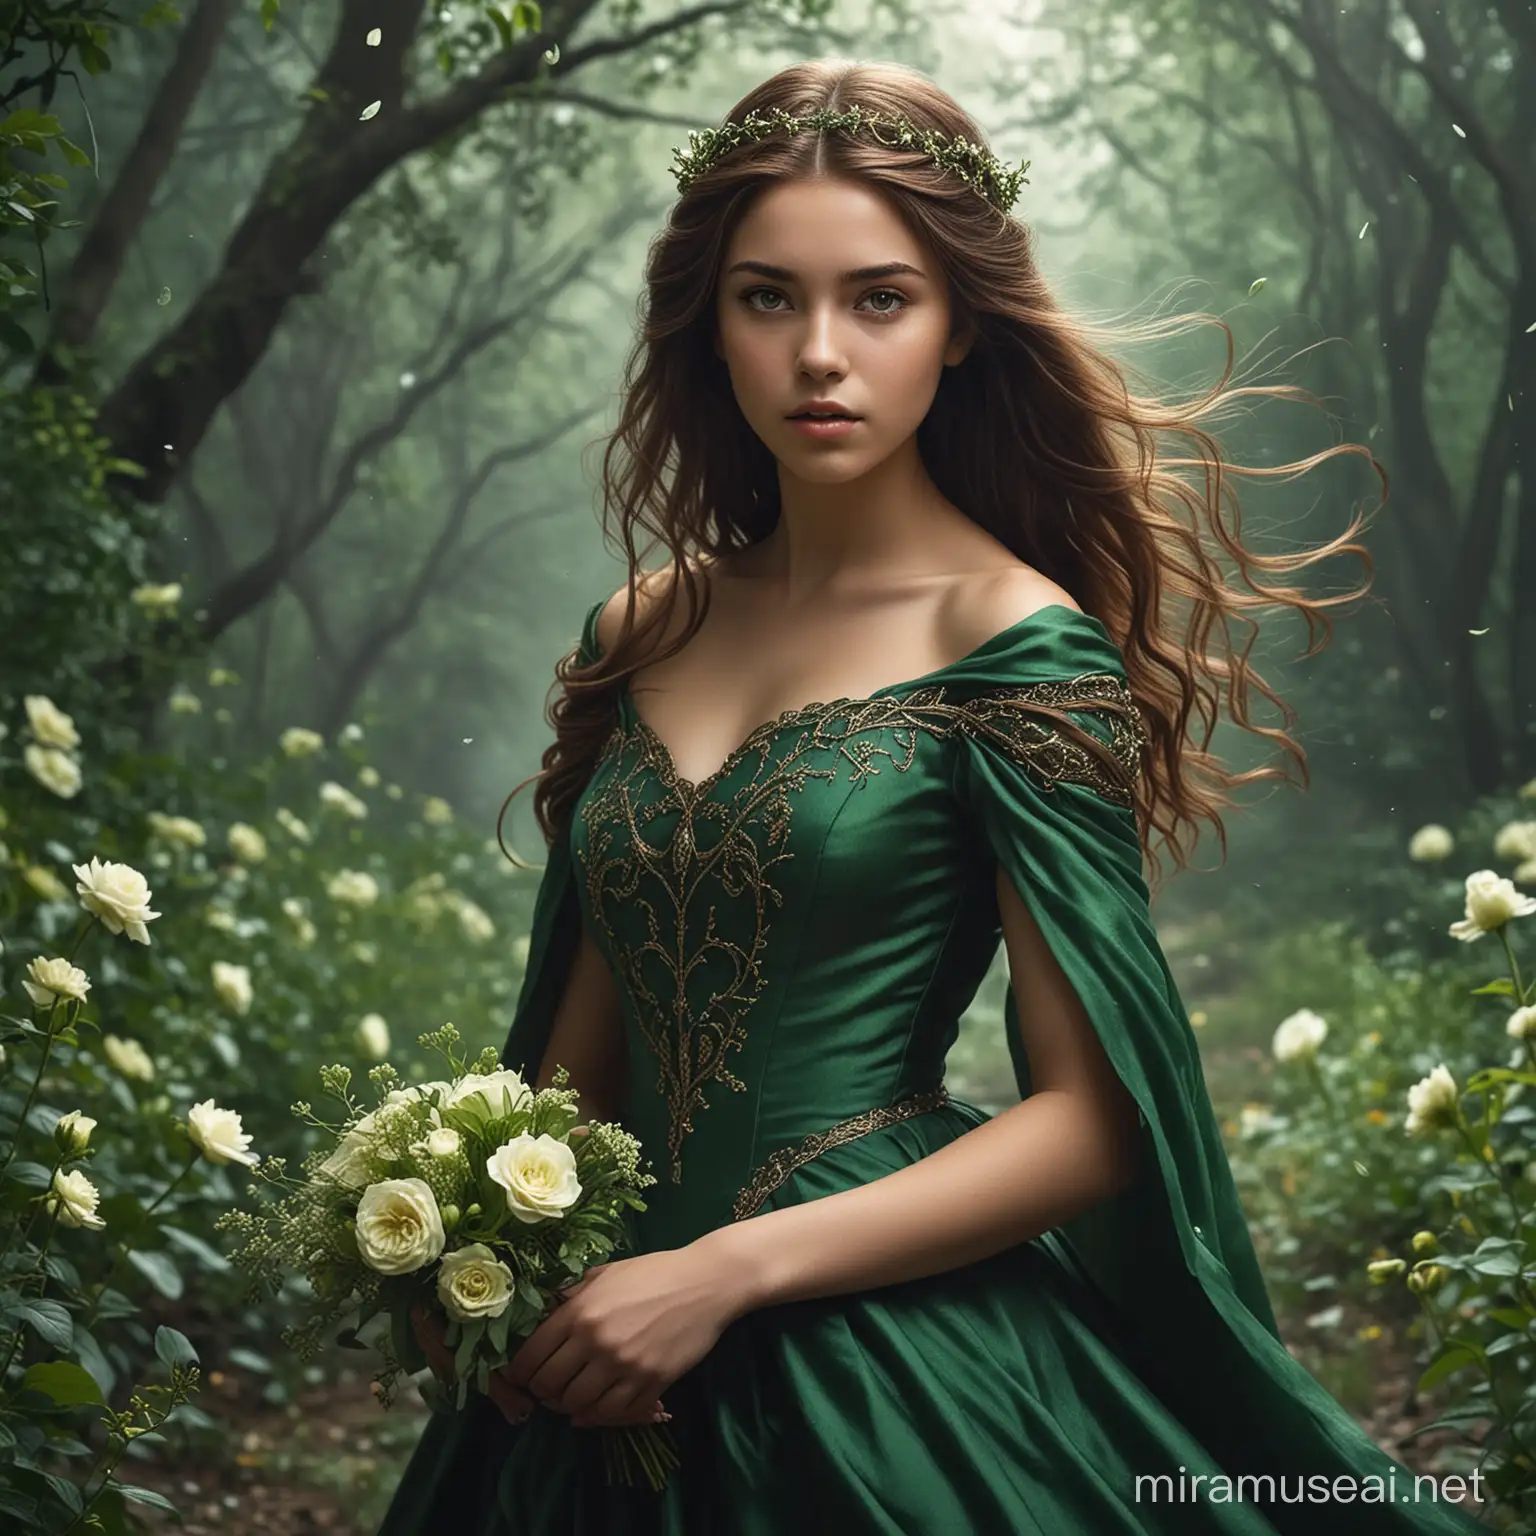 20 year old princess in a dark fantasy novel. she has brown hair and a green gown. she is using her powers to grow flowers